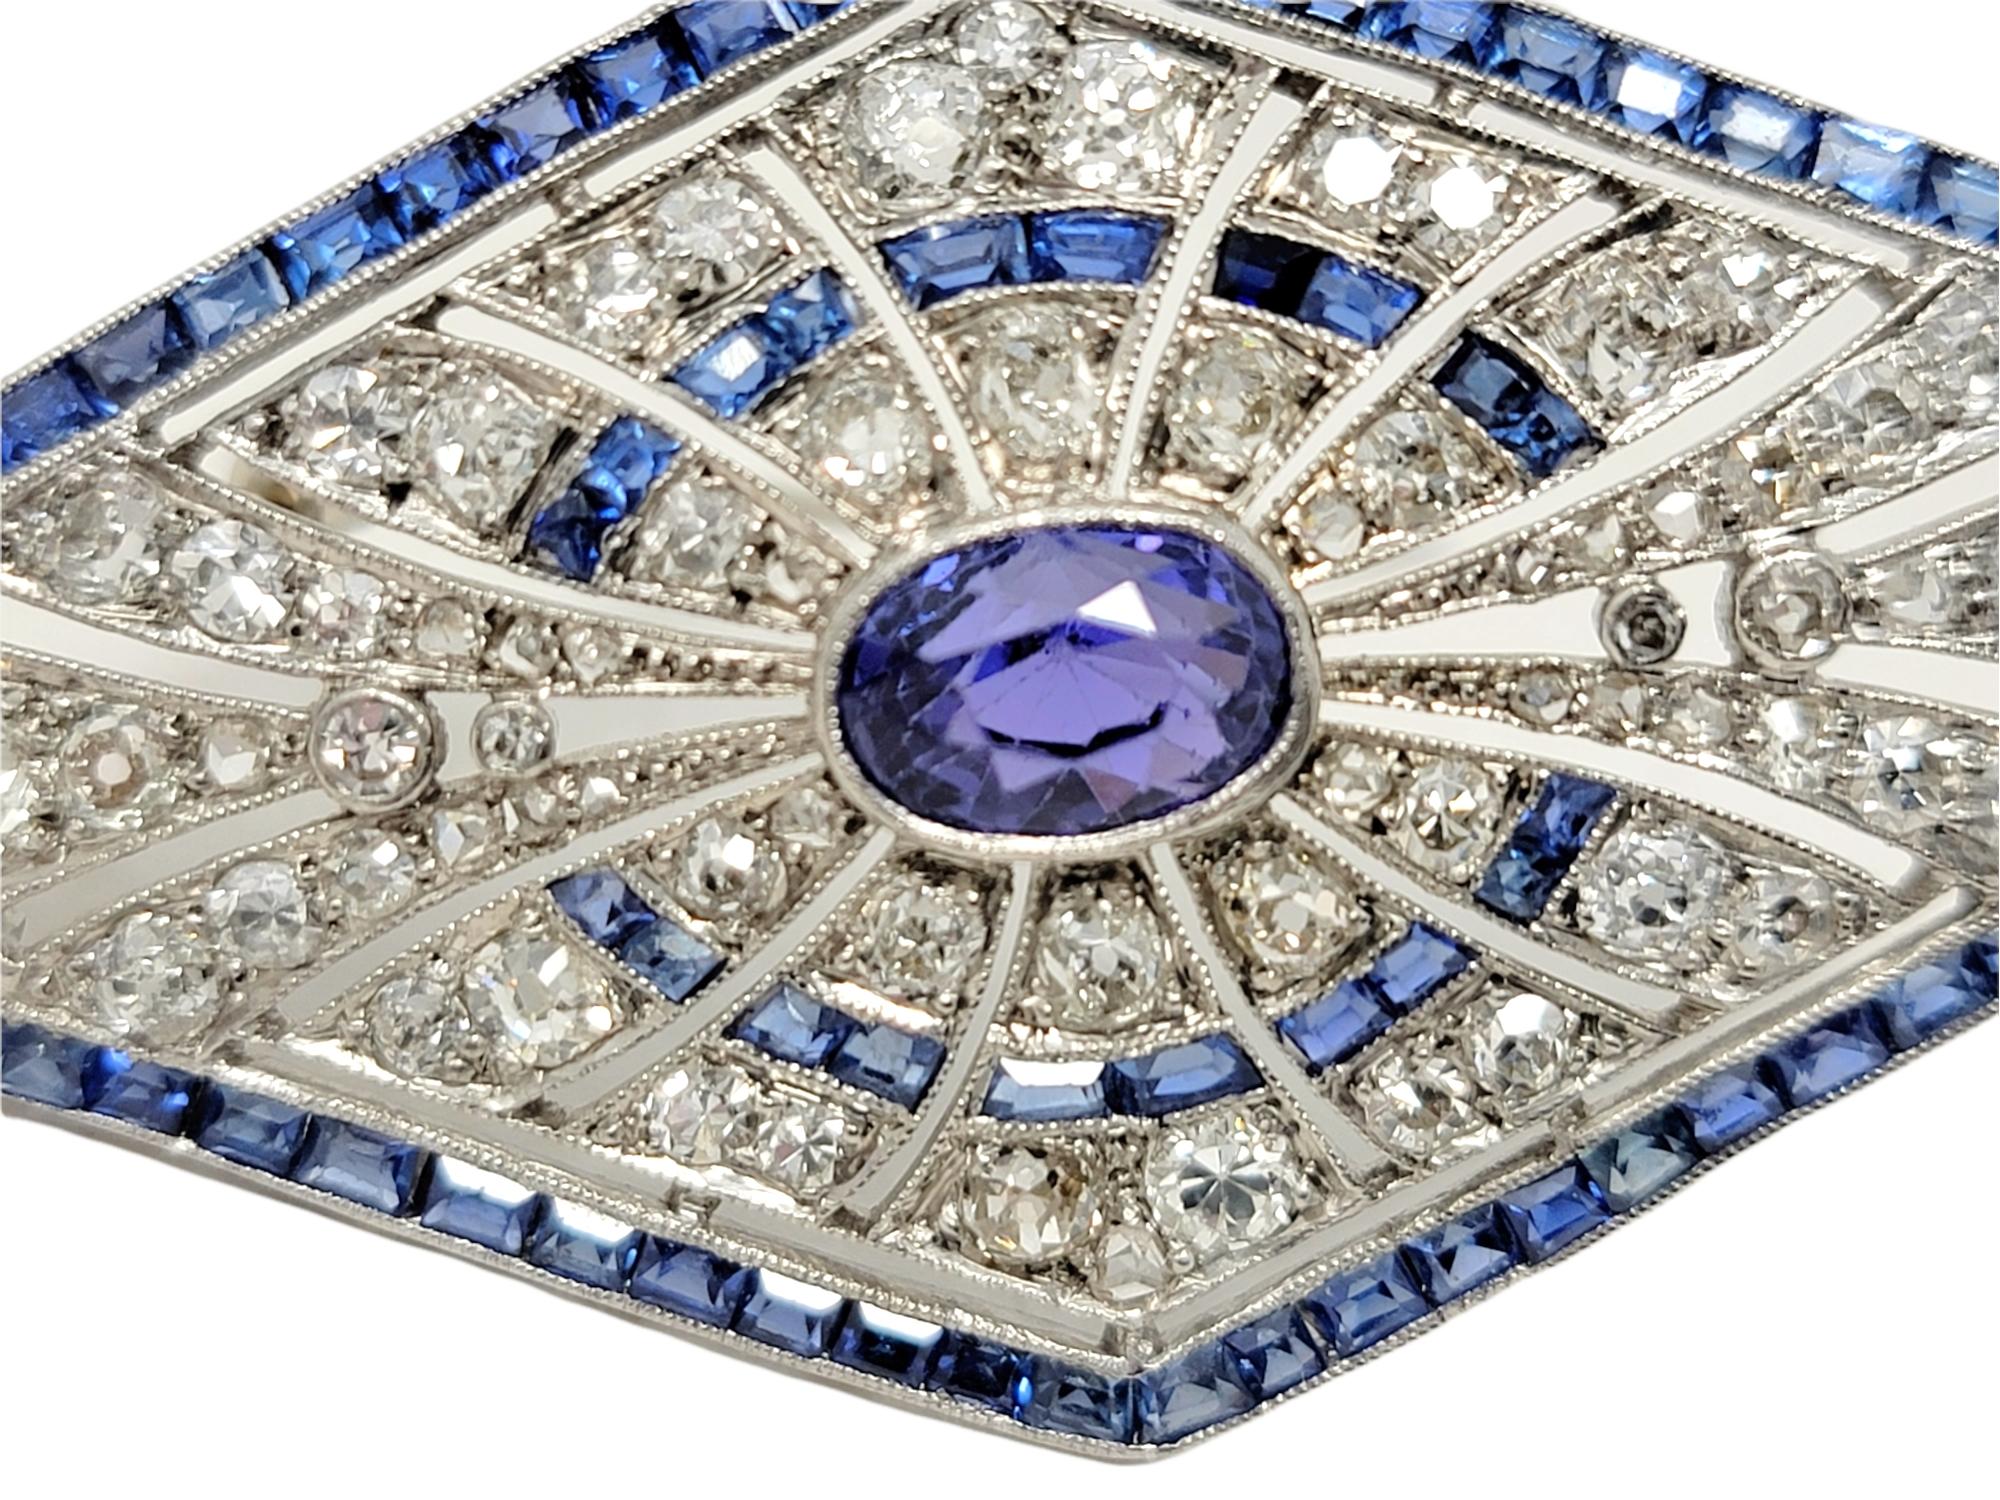 Vintage Oval Mixed Cut Sapphire and Diamond Brooch in Platinum 8.20 Carats Total In Good Condition For Sale In Scottsdale, AZ